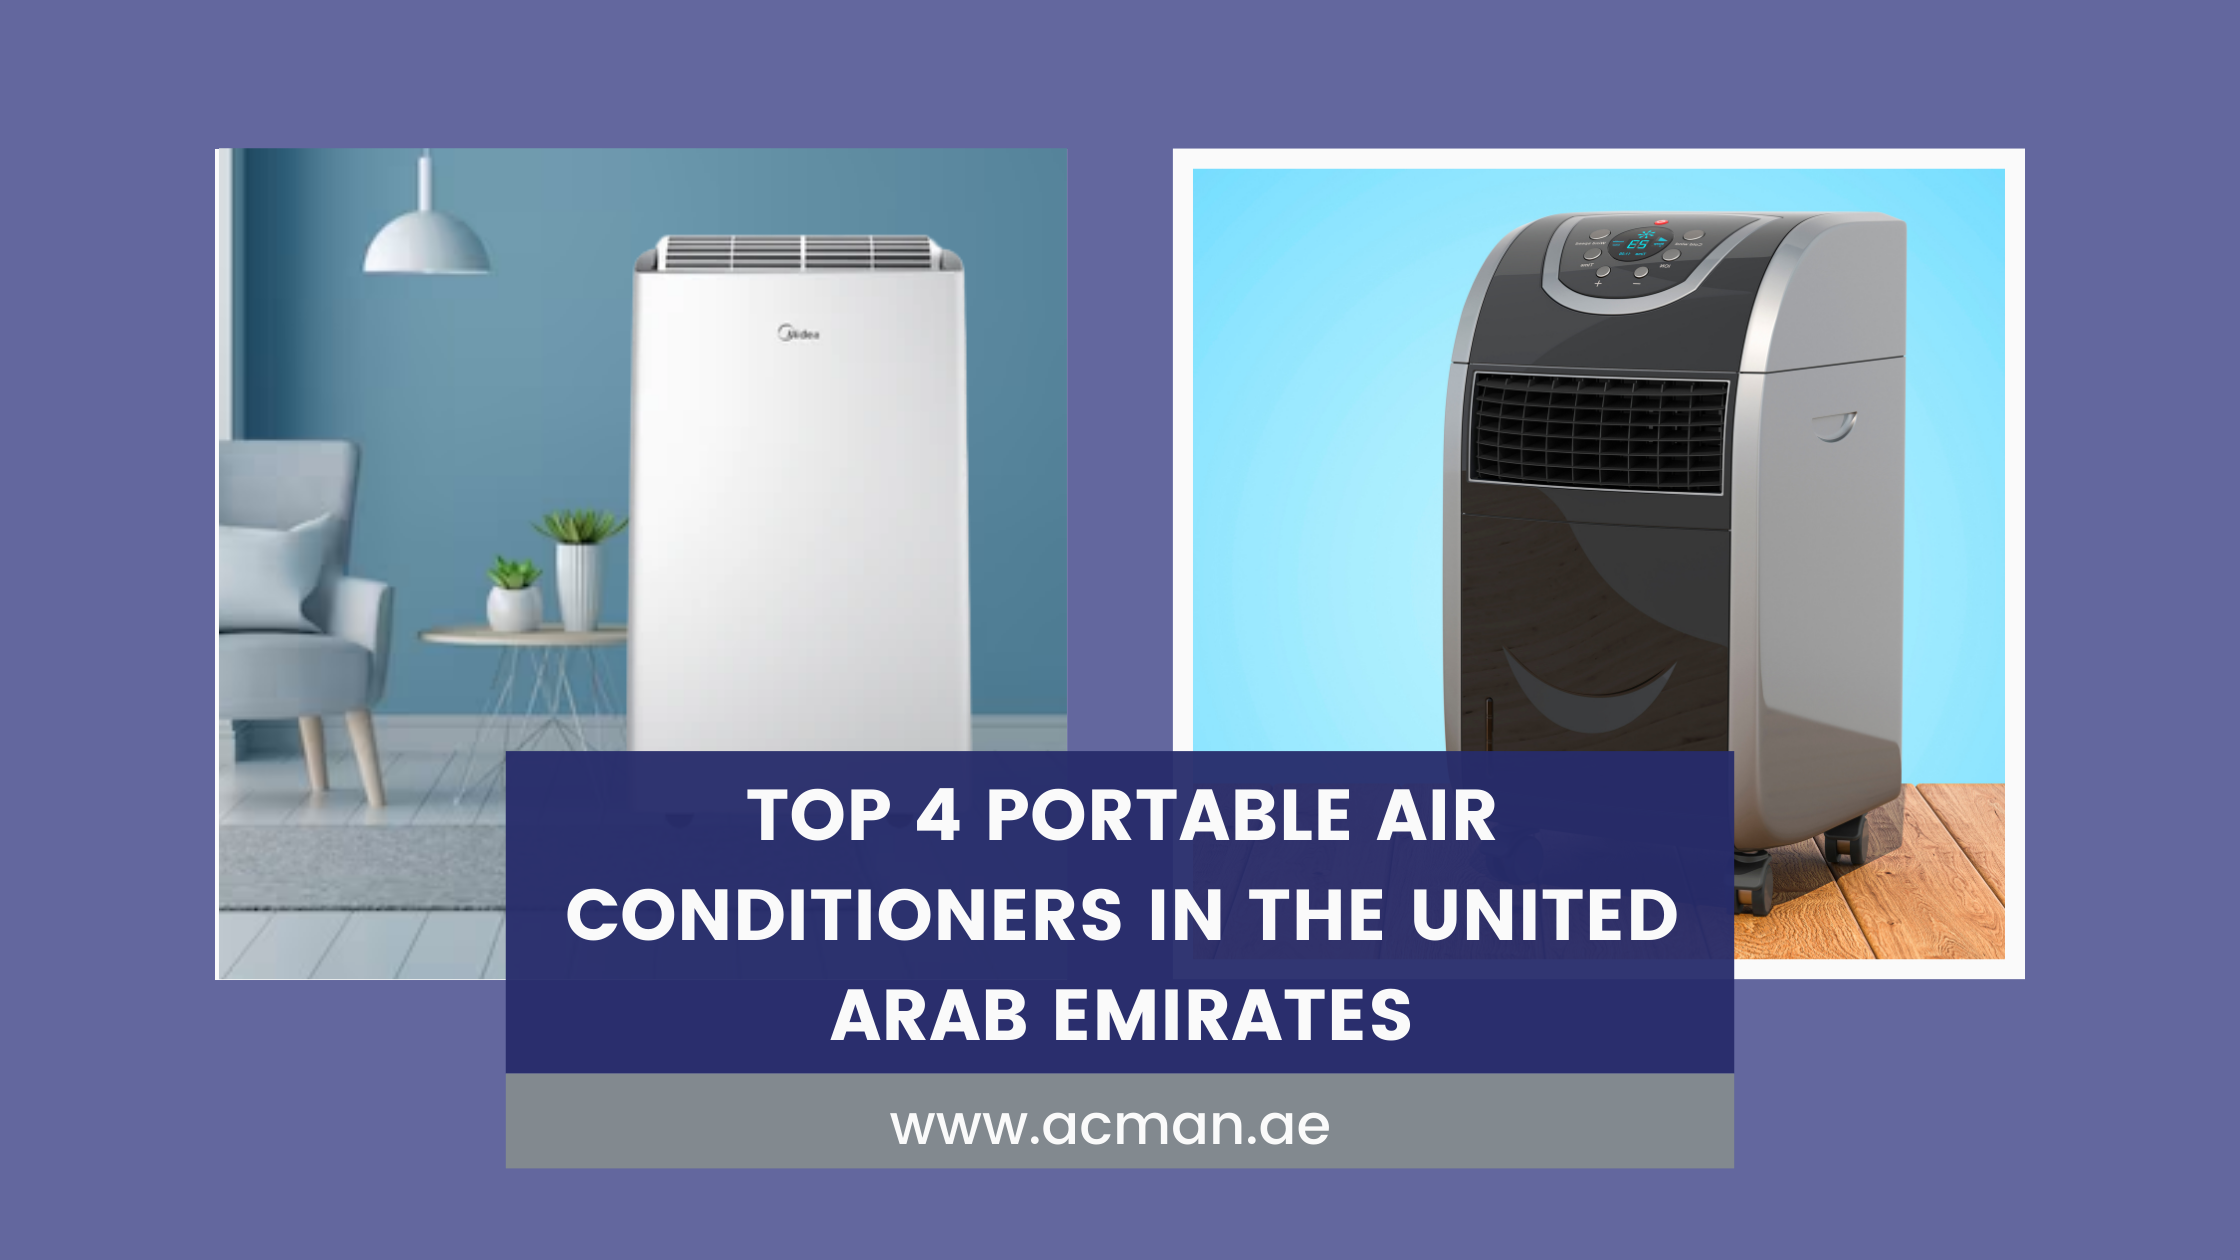 Top 4 Portable Air Conditioners in the United Arab Emirates